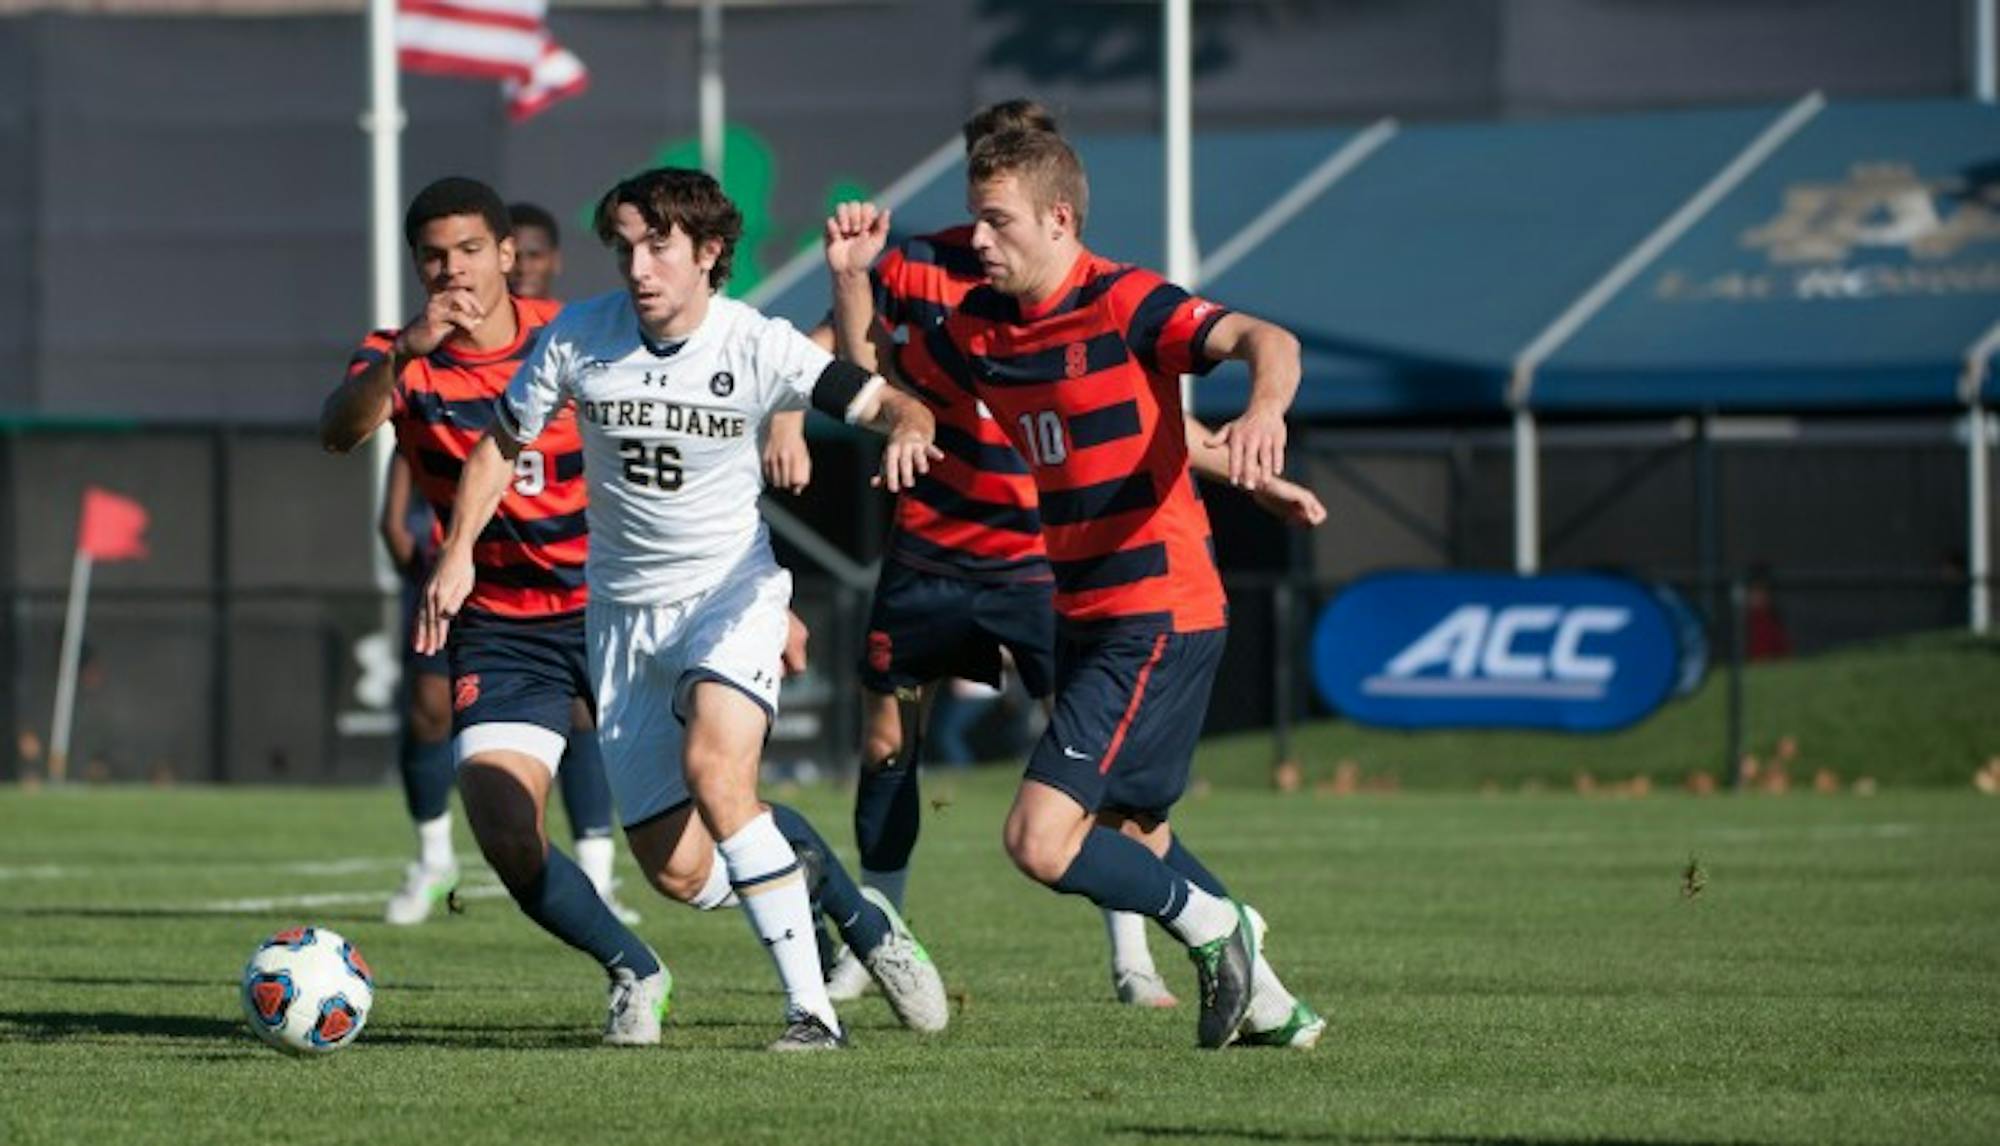 Junior midfielder Mark Gormley fend off defenders during Notre Dame’s 1-0 loss to Syracuse on Sunday in the ACC championship game at Alumni Stadium. Notre Dame starts NCAA tournament play this Sunday against Tulsa.